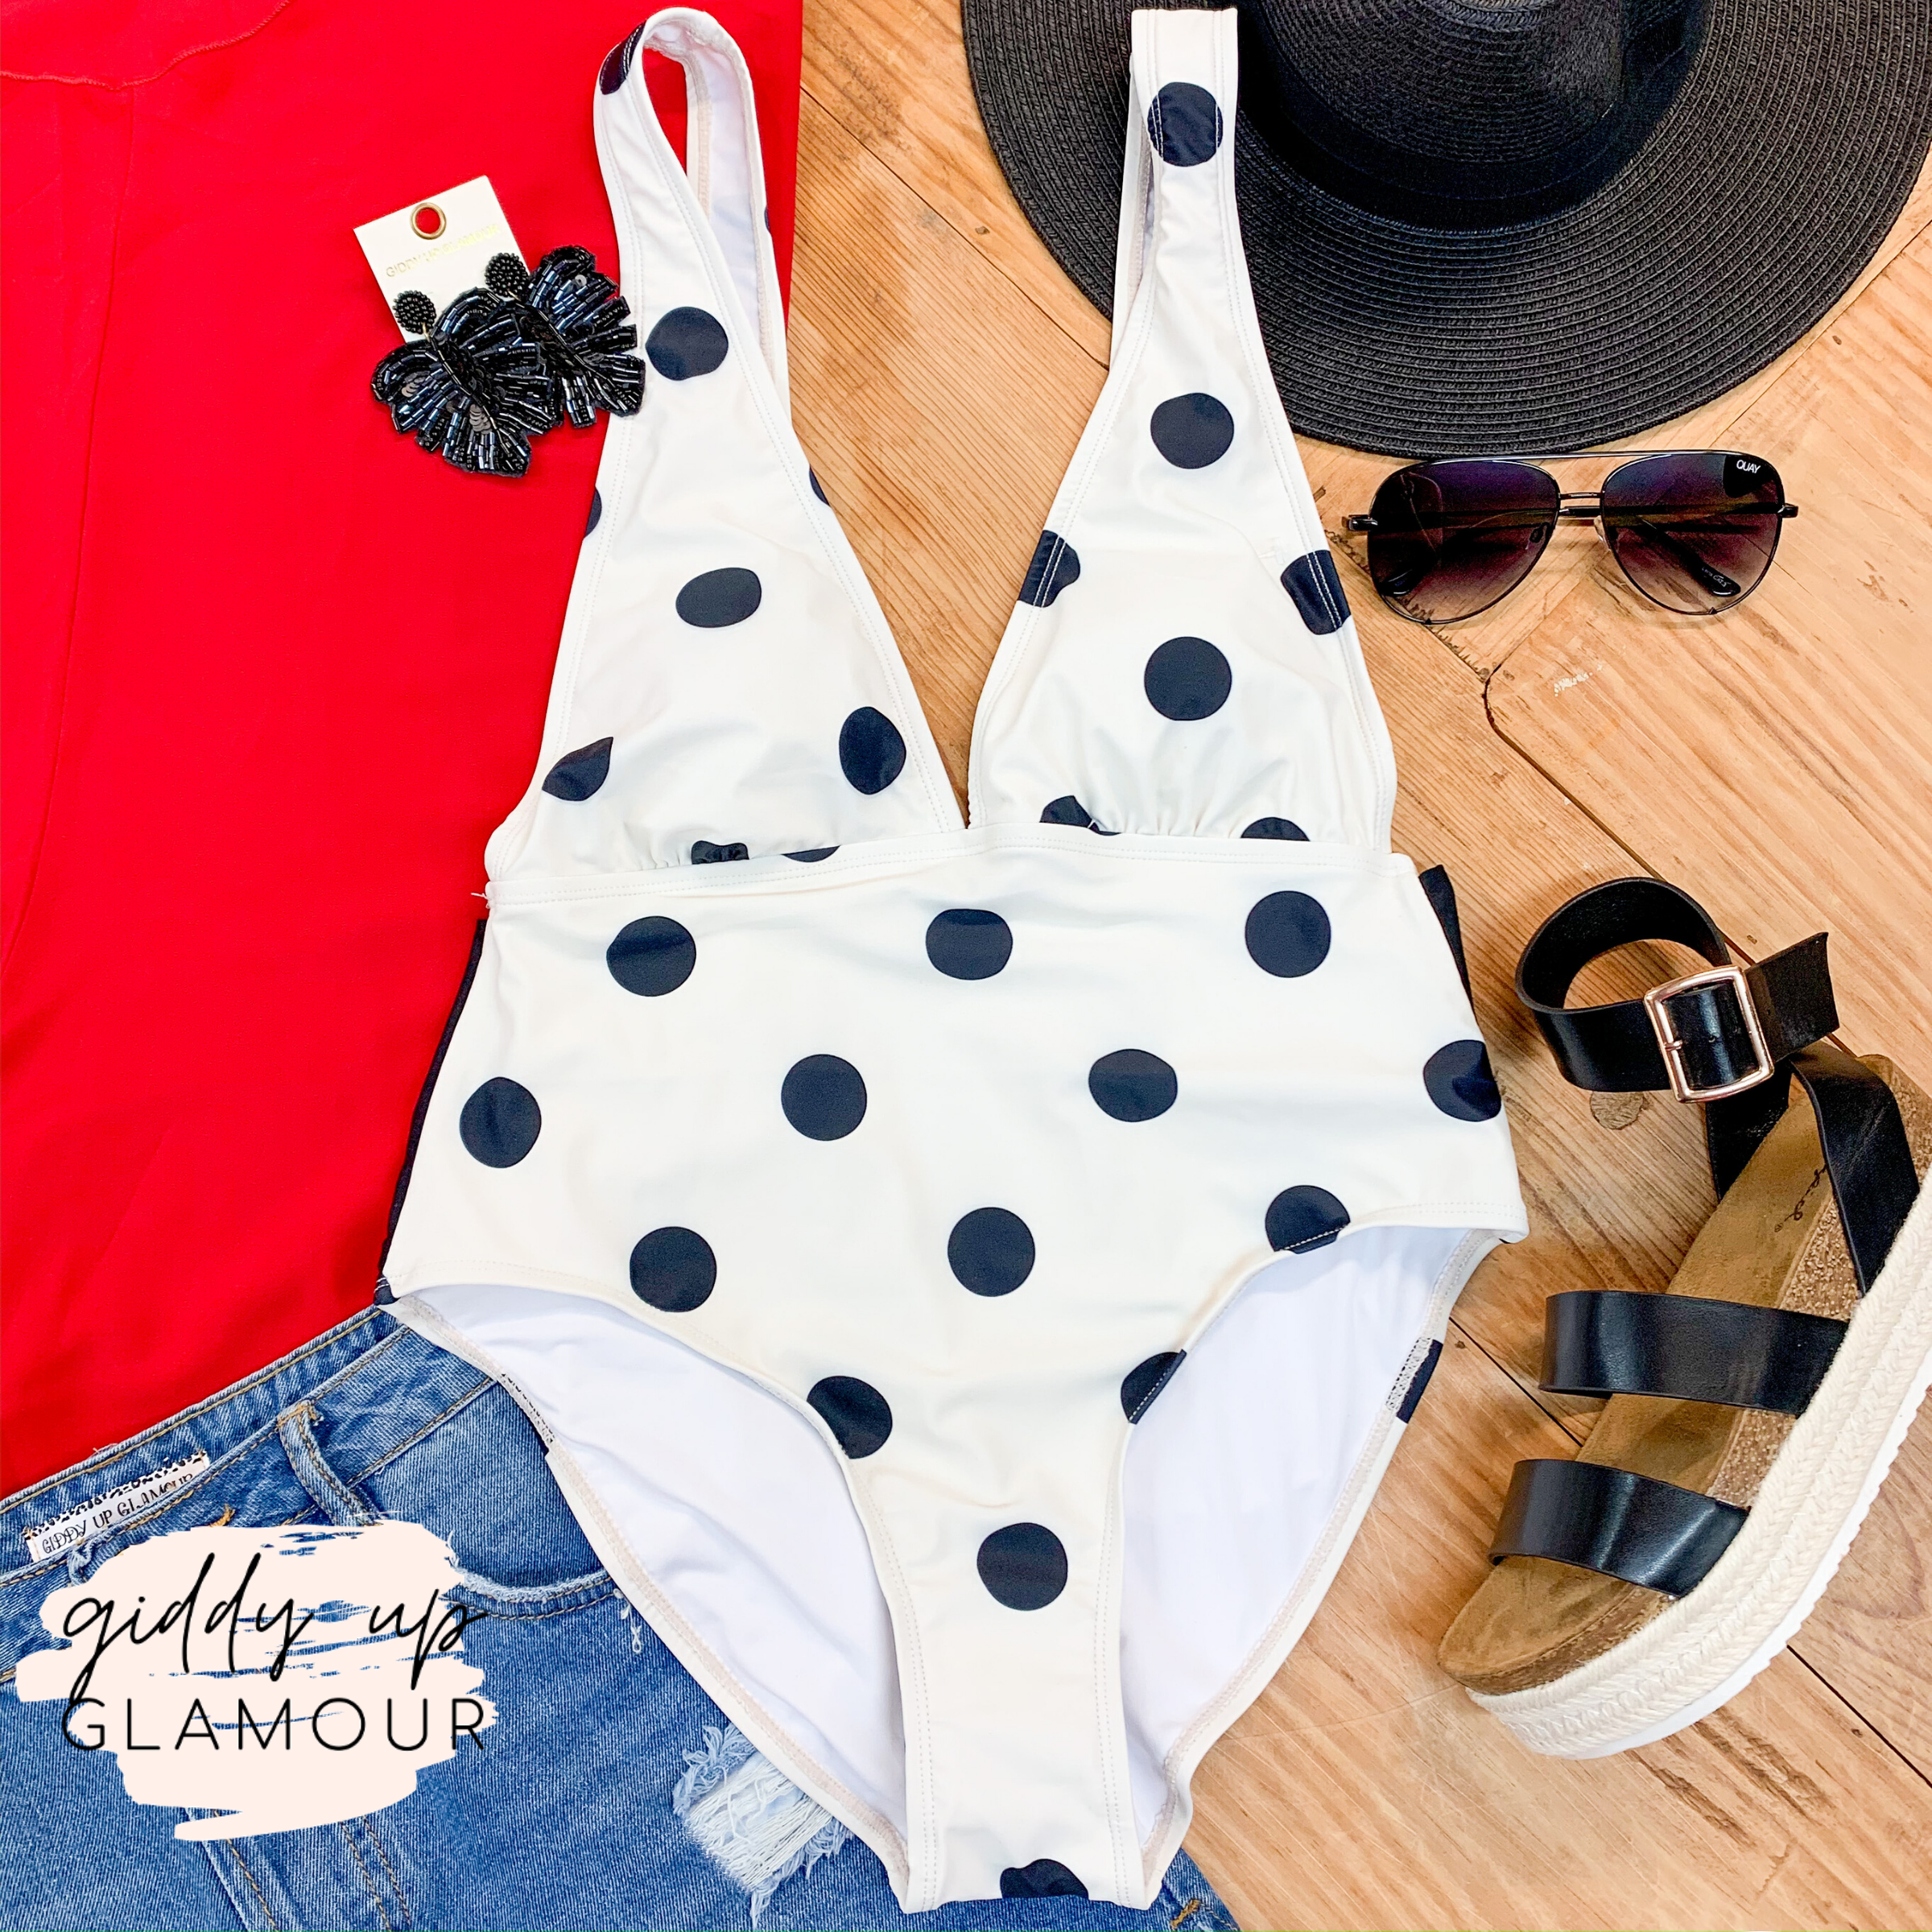 Getting Hotter Deep V Neck Polka Dot One Piece Swimsuit with Tie in Ivory - Giddy Up Glamour Boutique